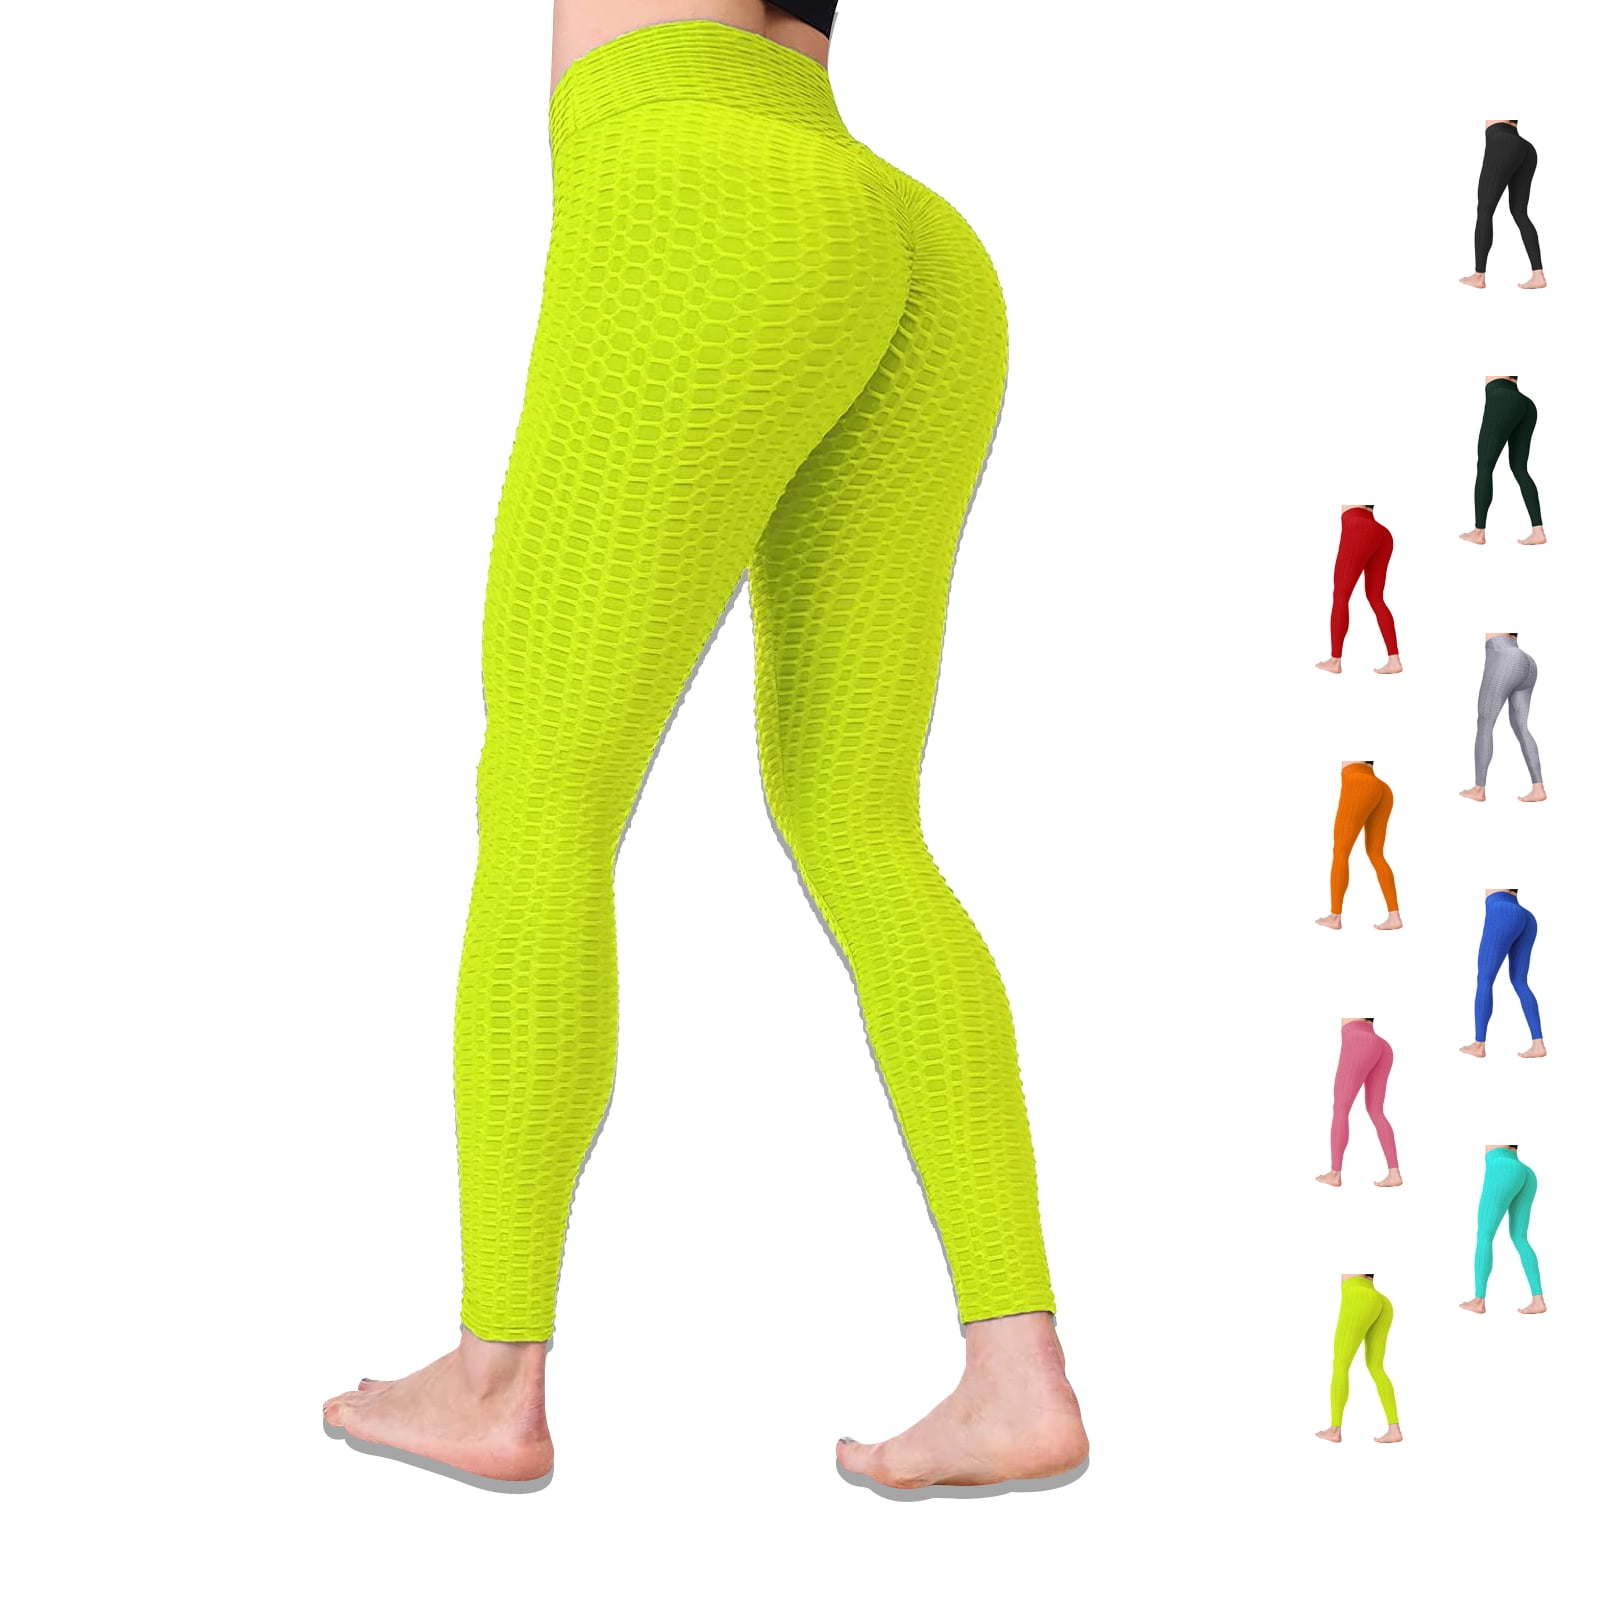 High Waist Tiktok Yoga Pants, Women Butt Lifting Leggings, Tummy Control  Ruched Slimming Booty Workout Tights, Blue, S Size 